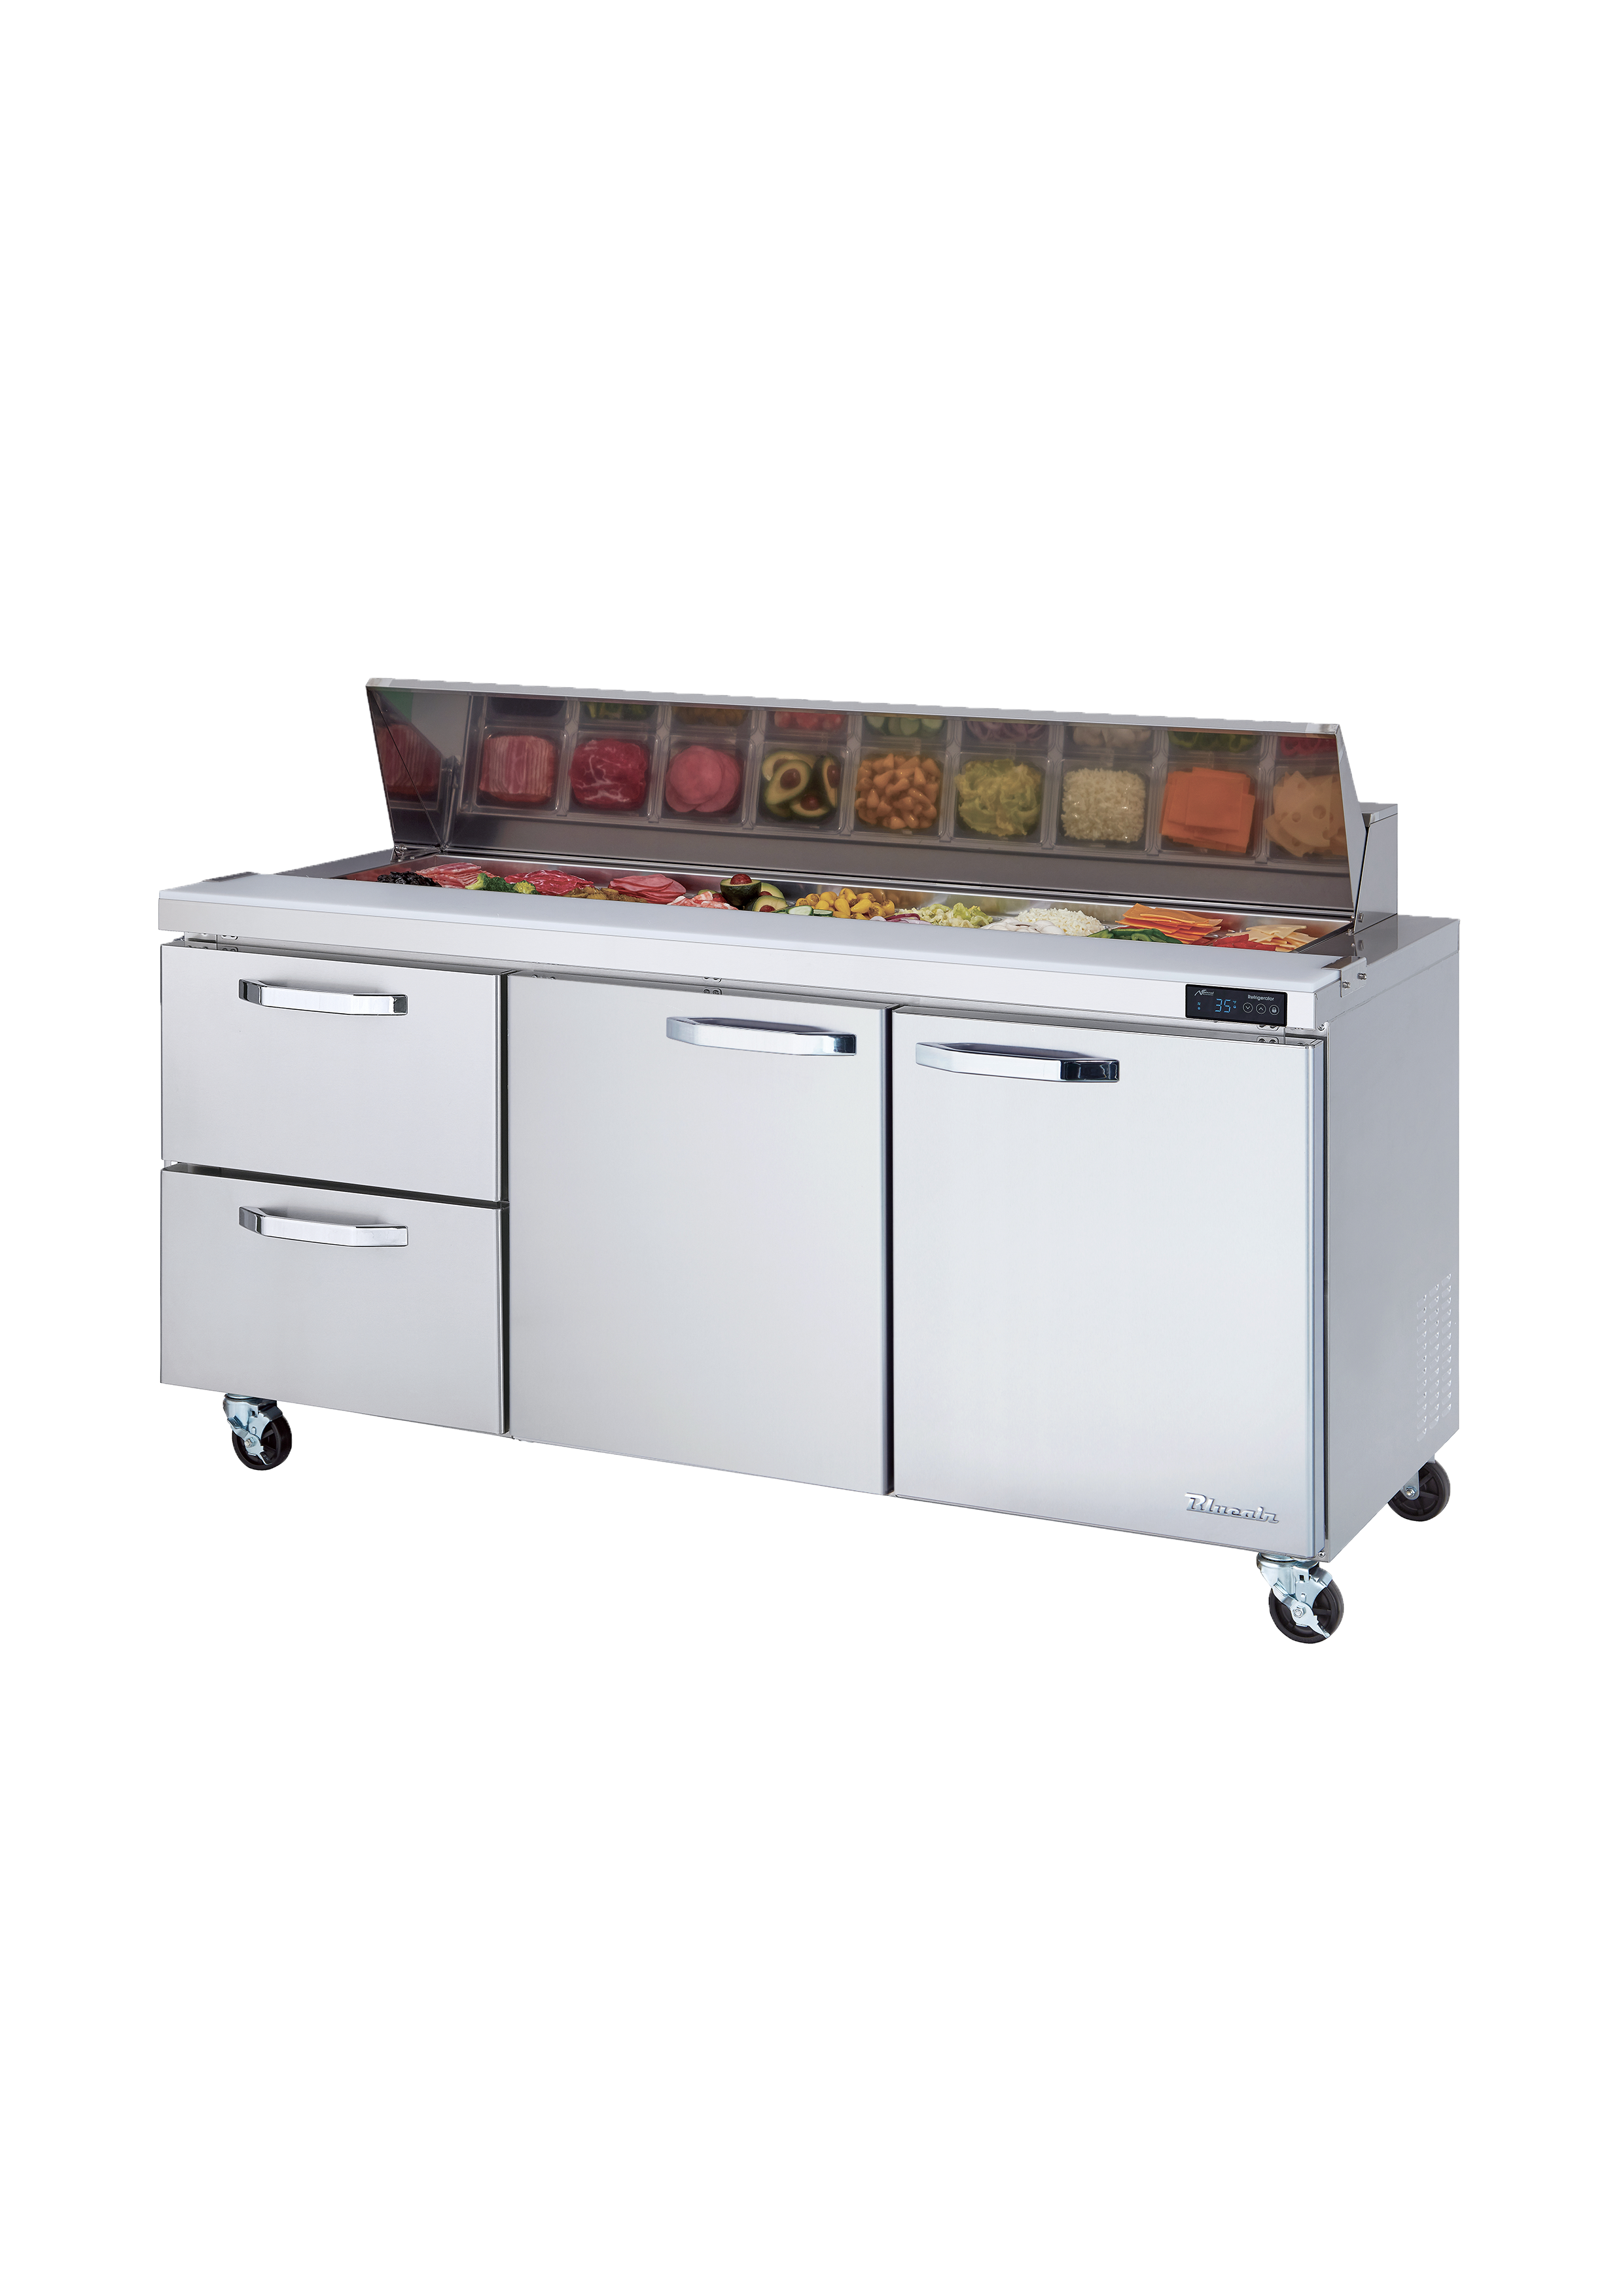 Blue Air - BLPT72-D2L-HC, 2 Drawers 2 Doors (M, R) All Stainless Prep. Table with (18) 1/6 Pans - 72" wide, 20 cu/ft., R-290 Refrigerant